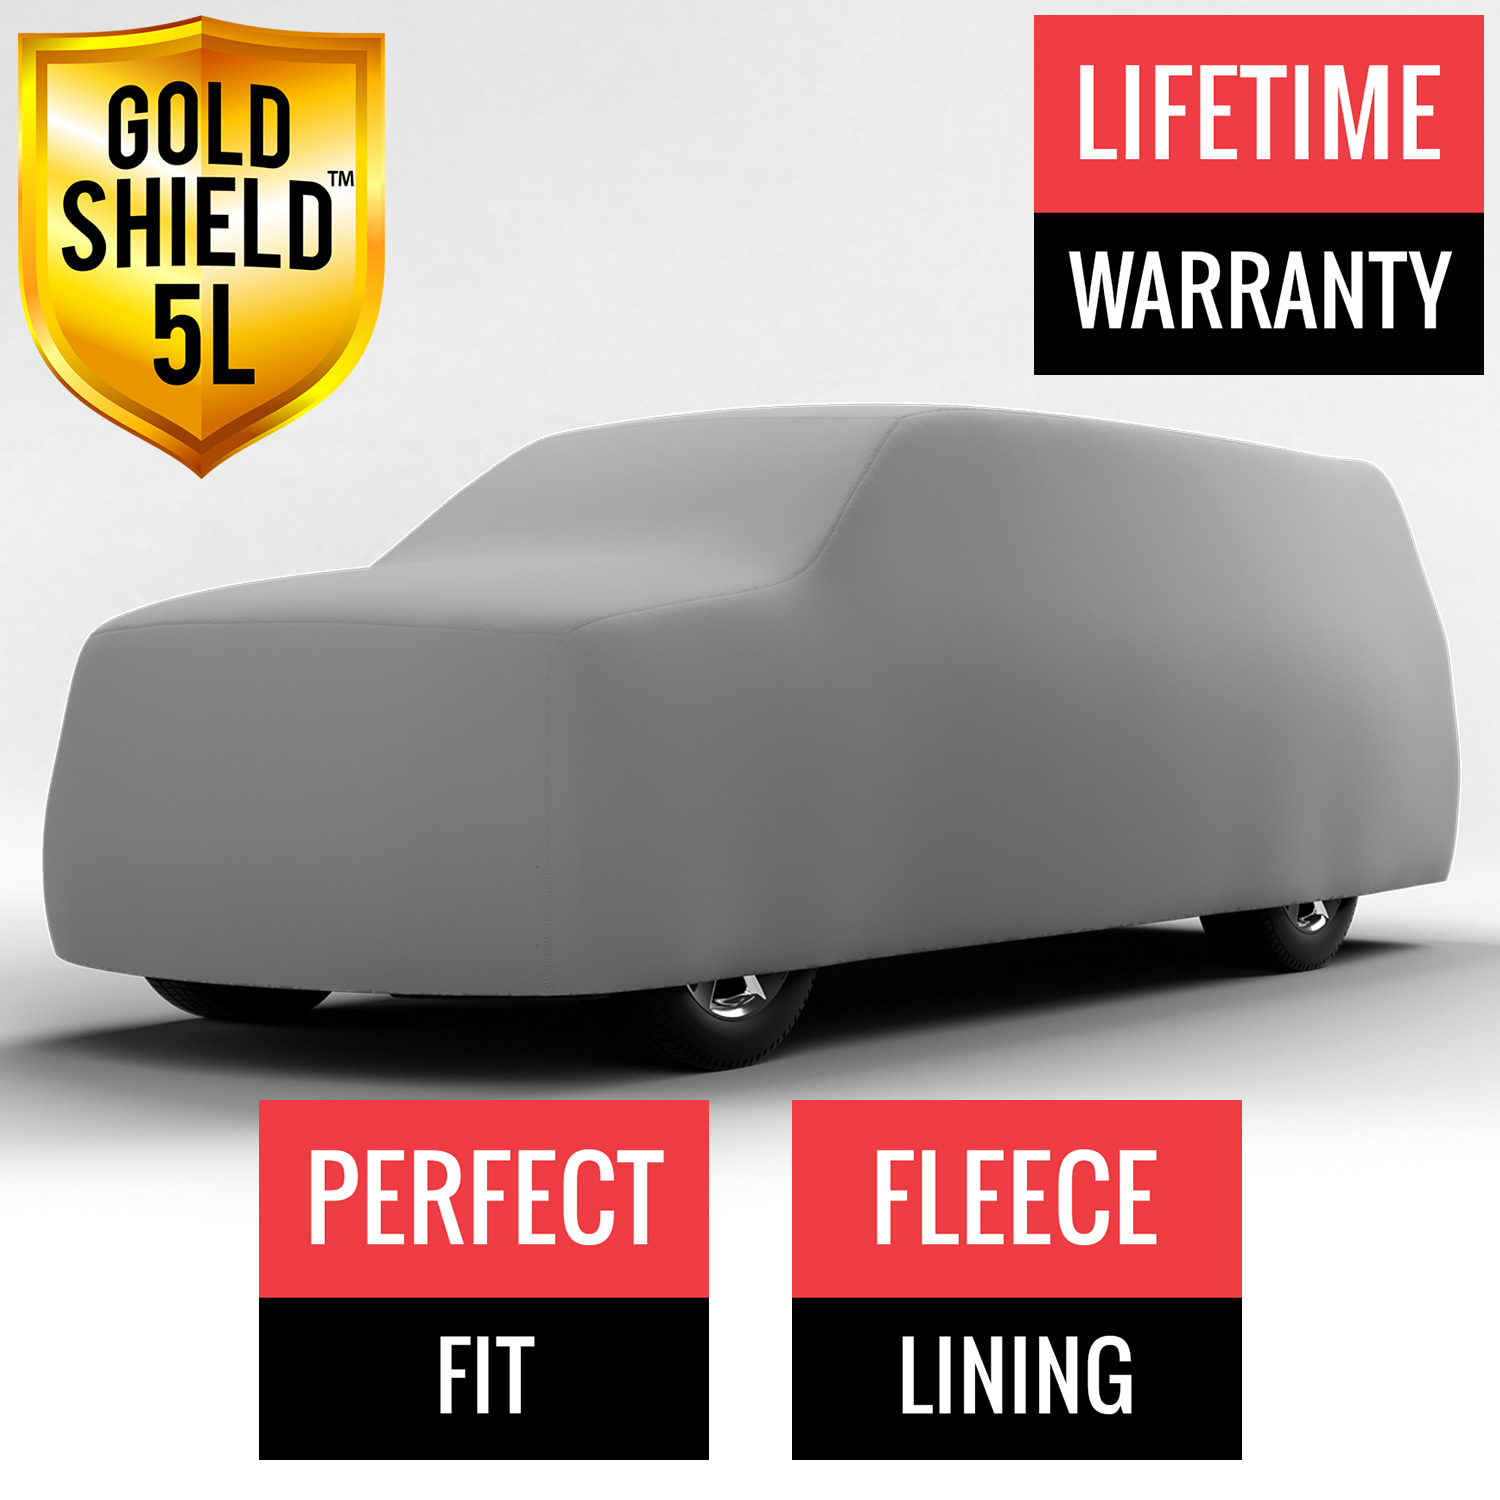 Gold Shield 5L - Car Cover for GMC C35 Pickup 1968 Regular Cab Pickup 8.0 Feet Bed with Camper Shell